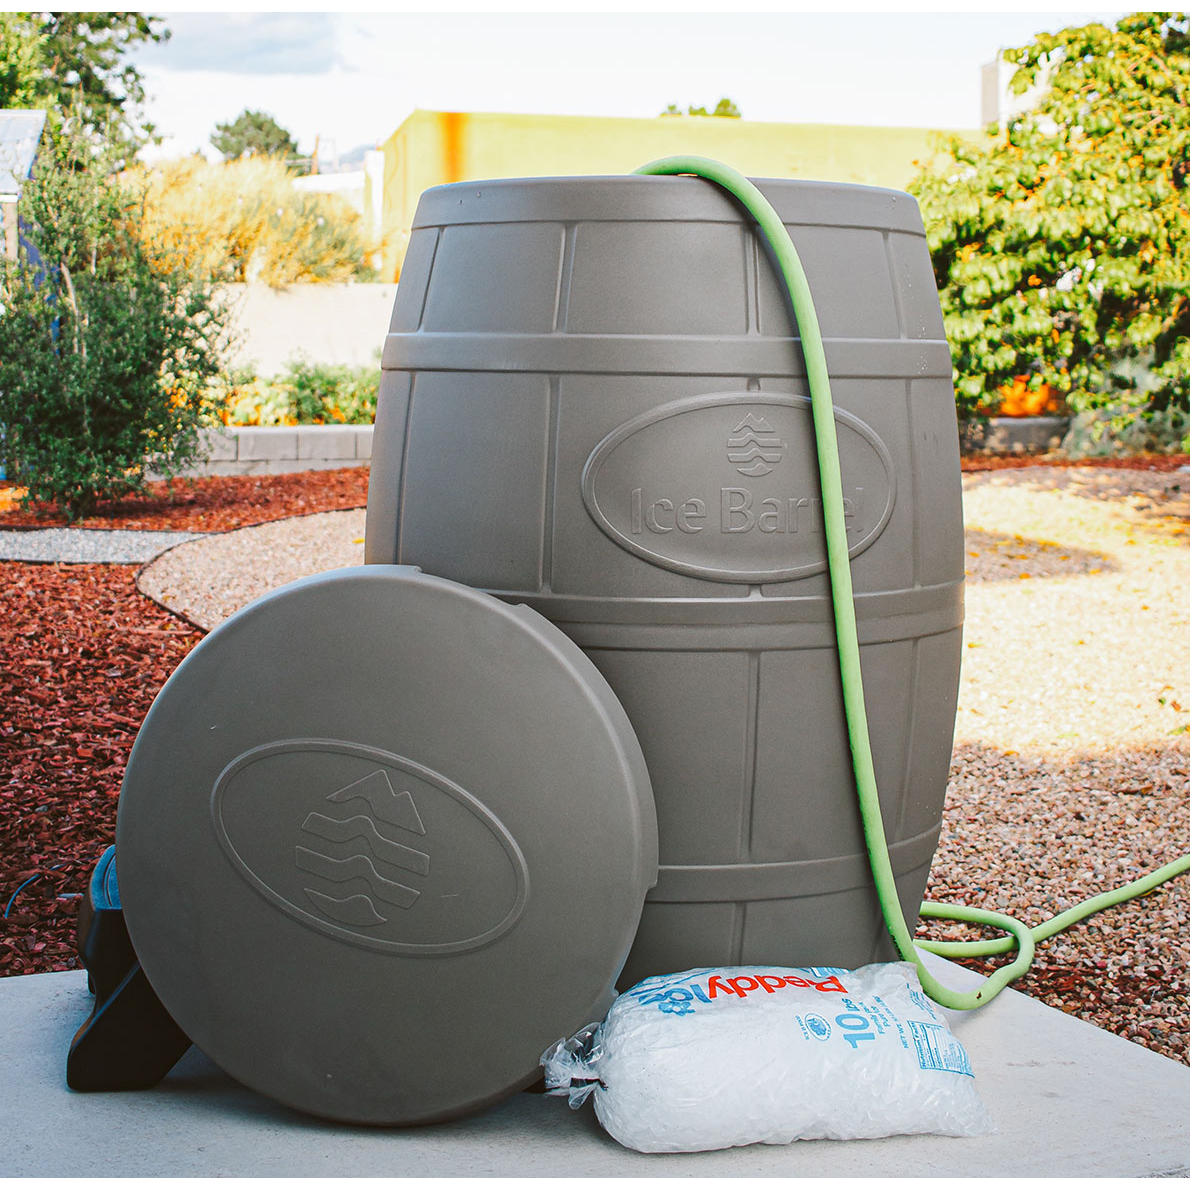 Ice Barrel 400 Cold Therapy PLUS FREE GIFT